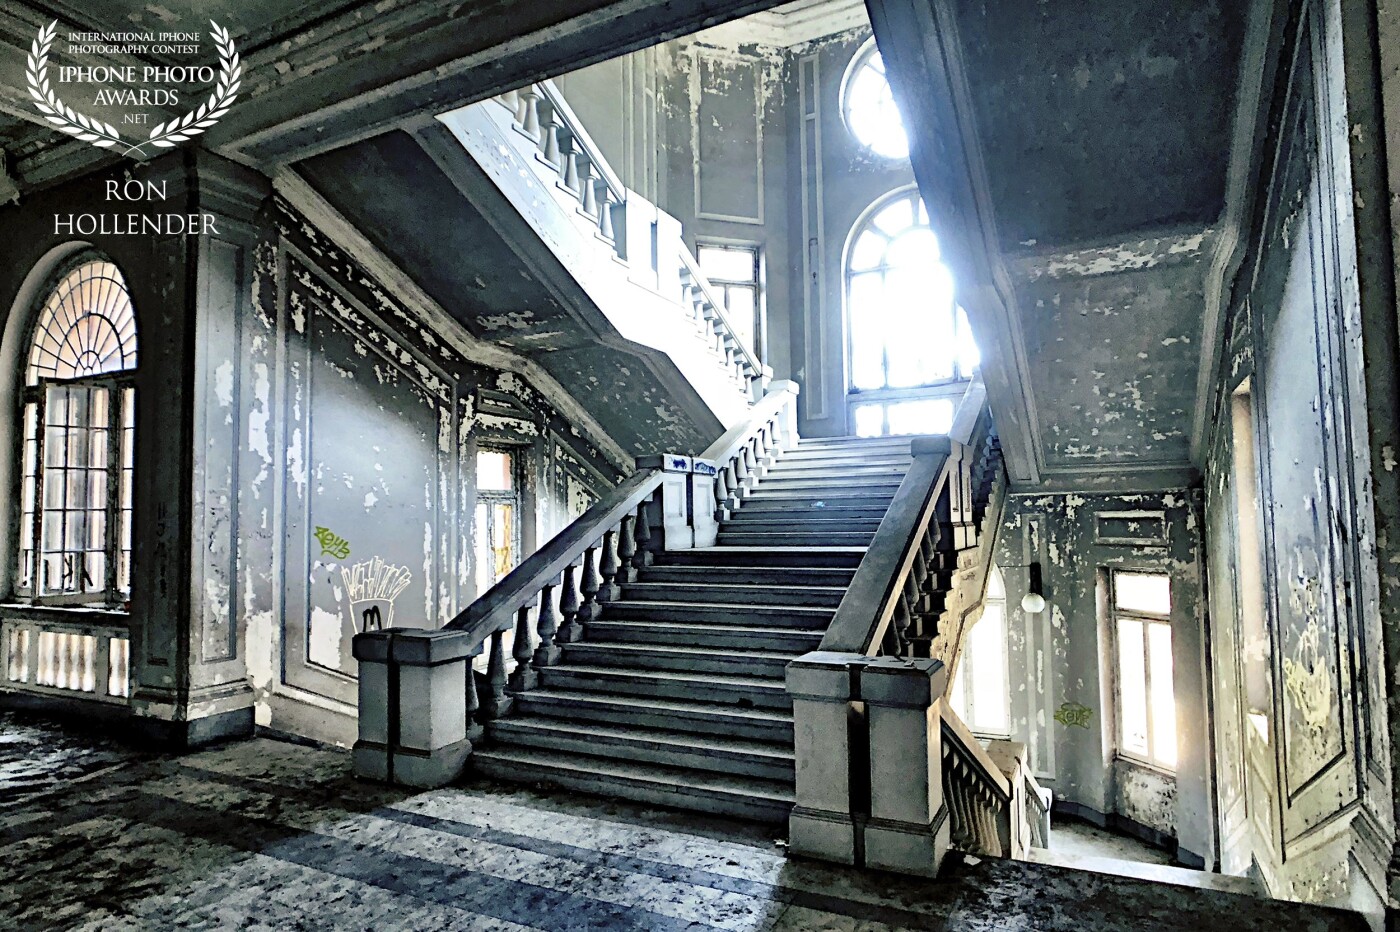 Photographing Lost Places is my great passion, rooms tell you stories of bygone years. <br />
Pure head cinema. <br />
On our journey through Italy we stopped in Genoa and visited a secret Lost Places Location and there I found this fantastic light-flooded staircase and was able to capture a moment that tells millions of stories.